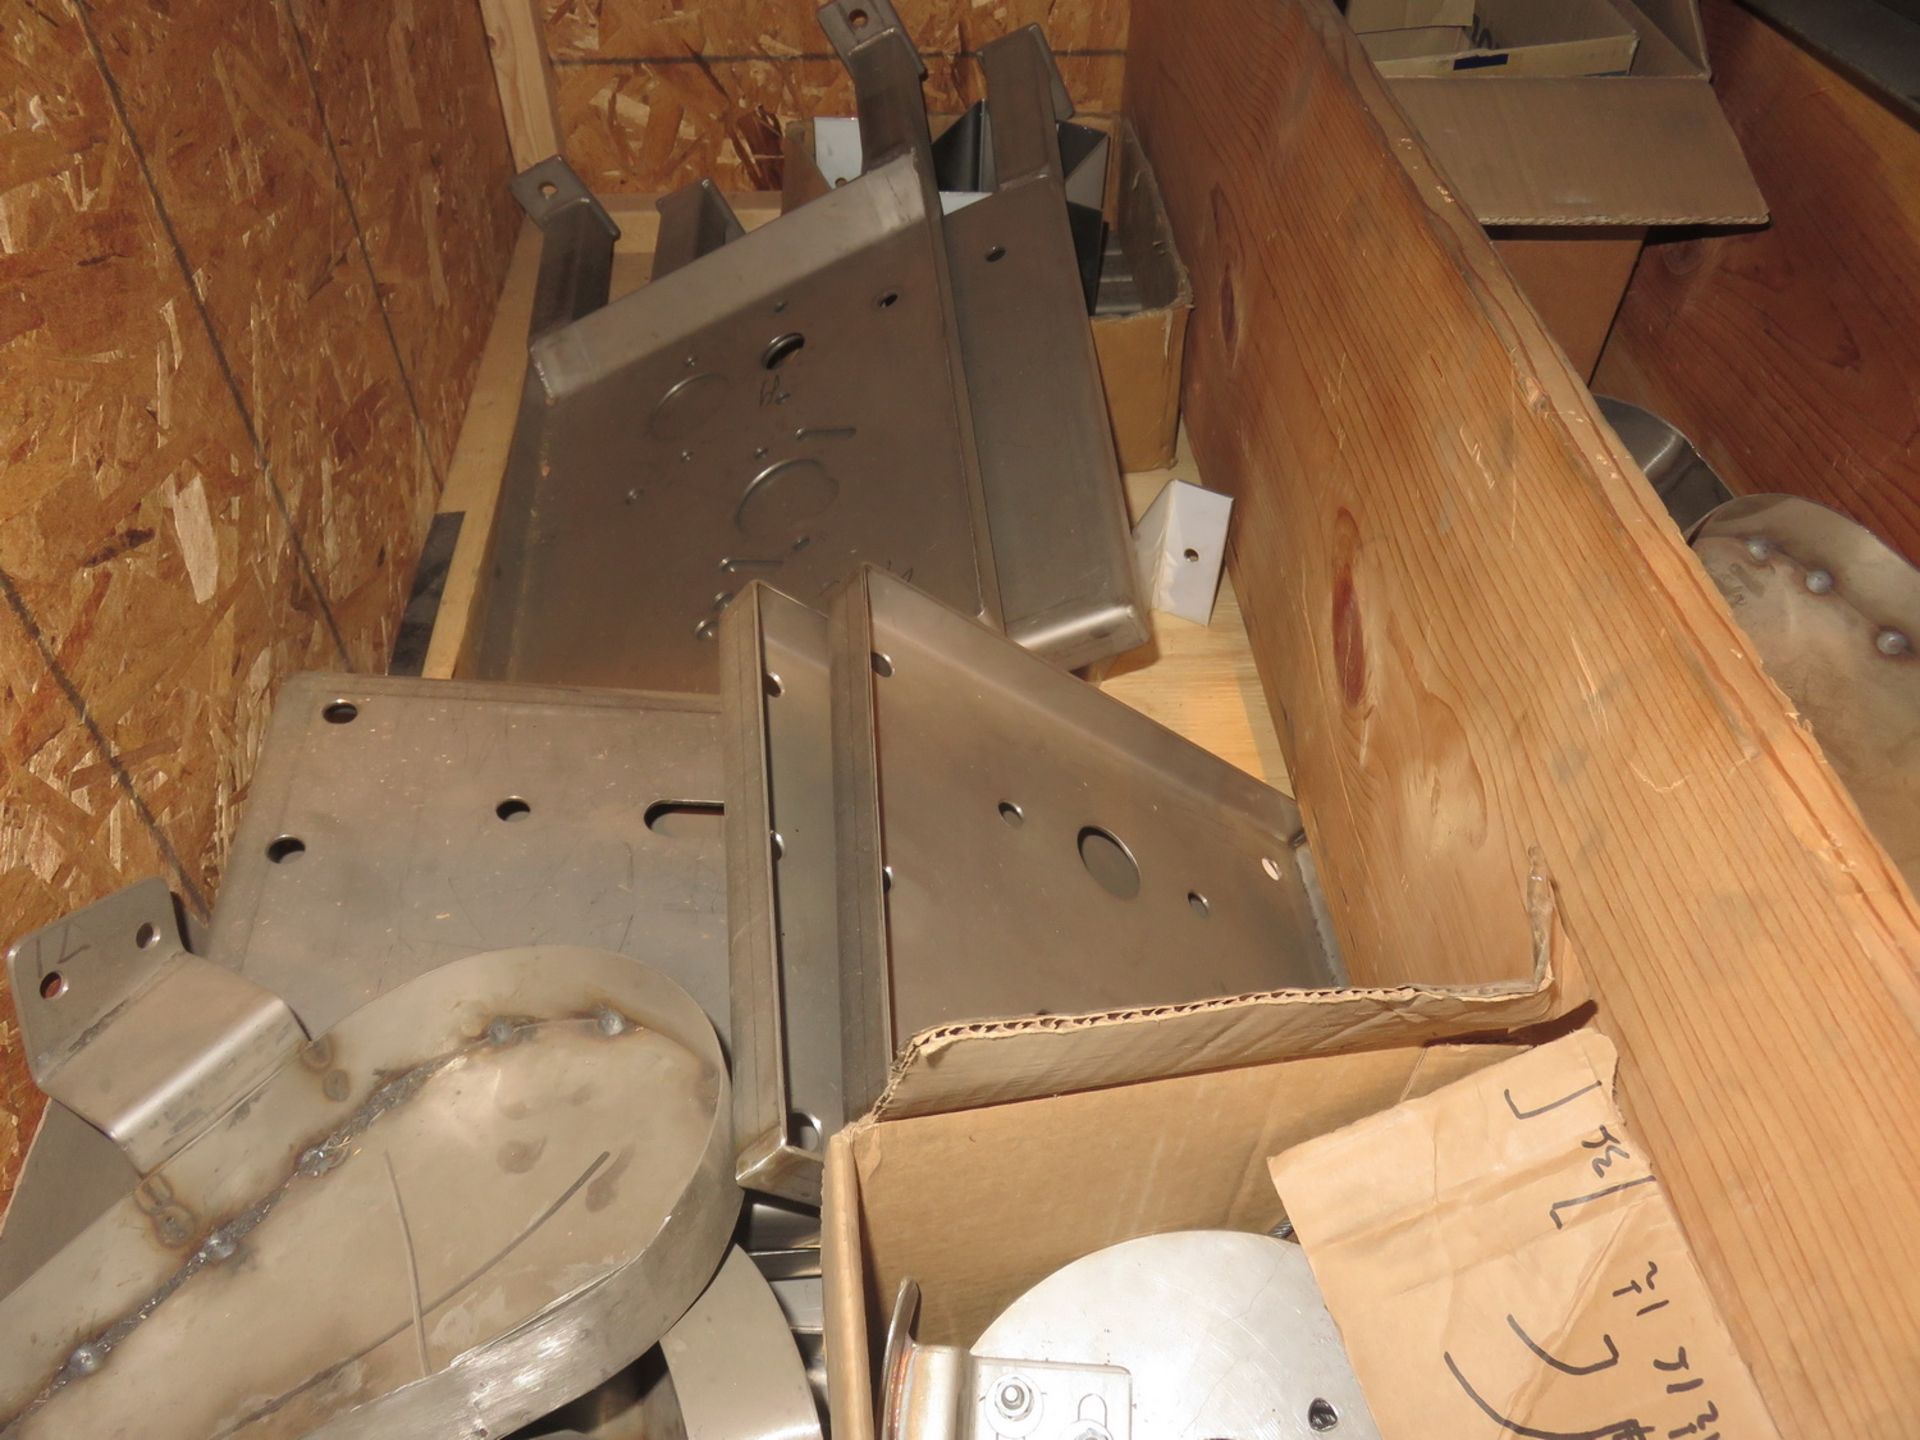 LOT - STAINLESS STEEL DRIVE UNIT, PLASTIC SLEEVES & PANELS (MUST TAKE WOOD CRATES) - Image 4 of 5